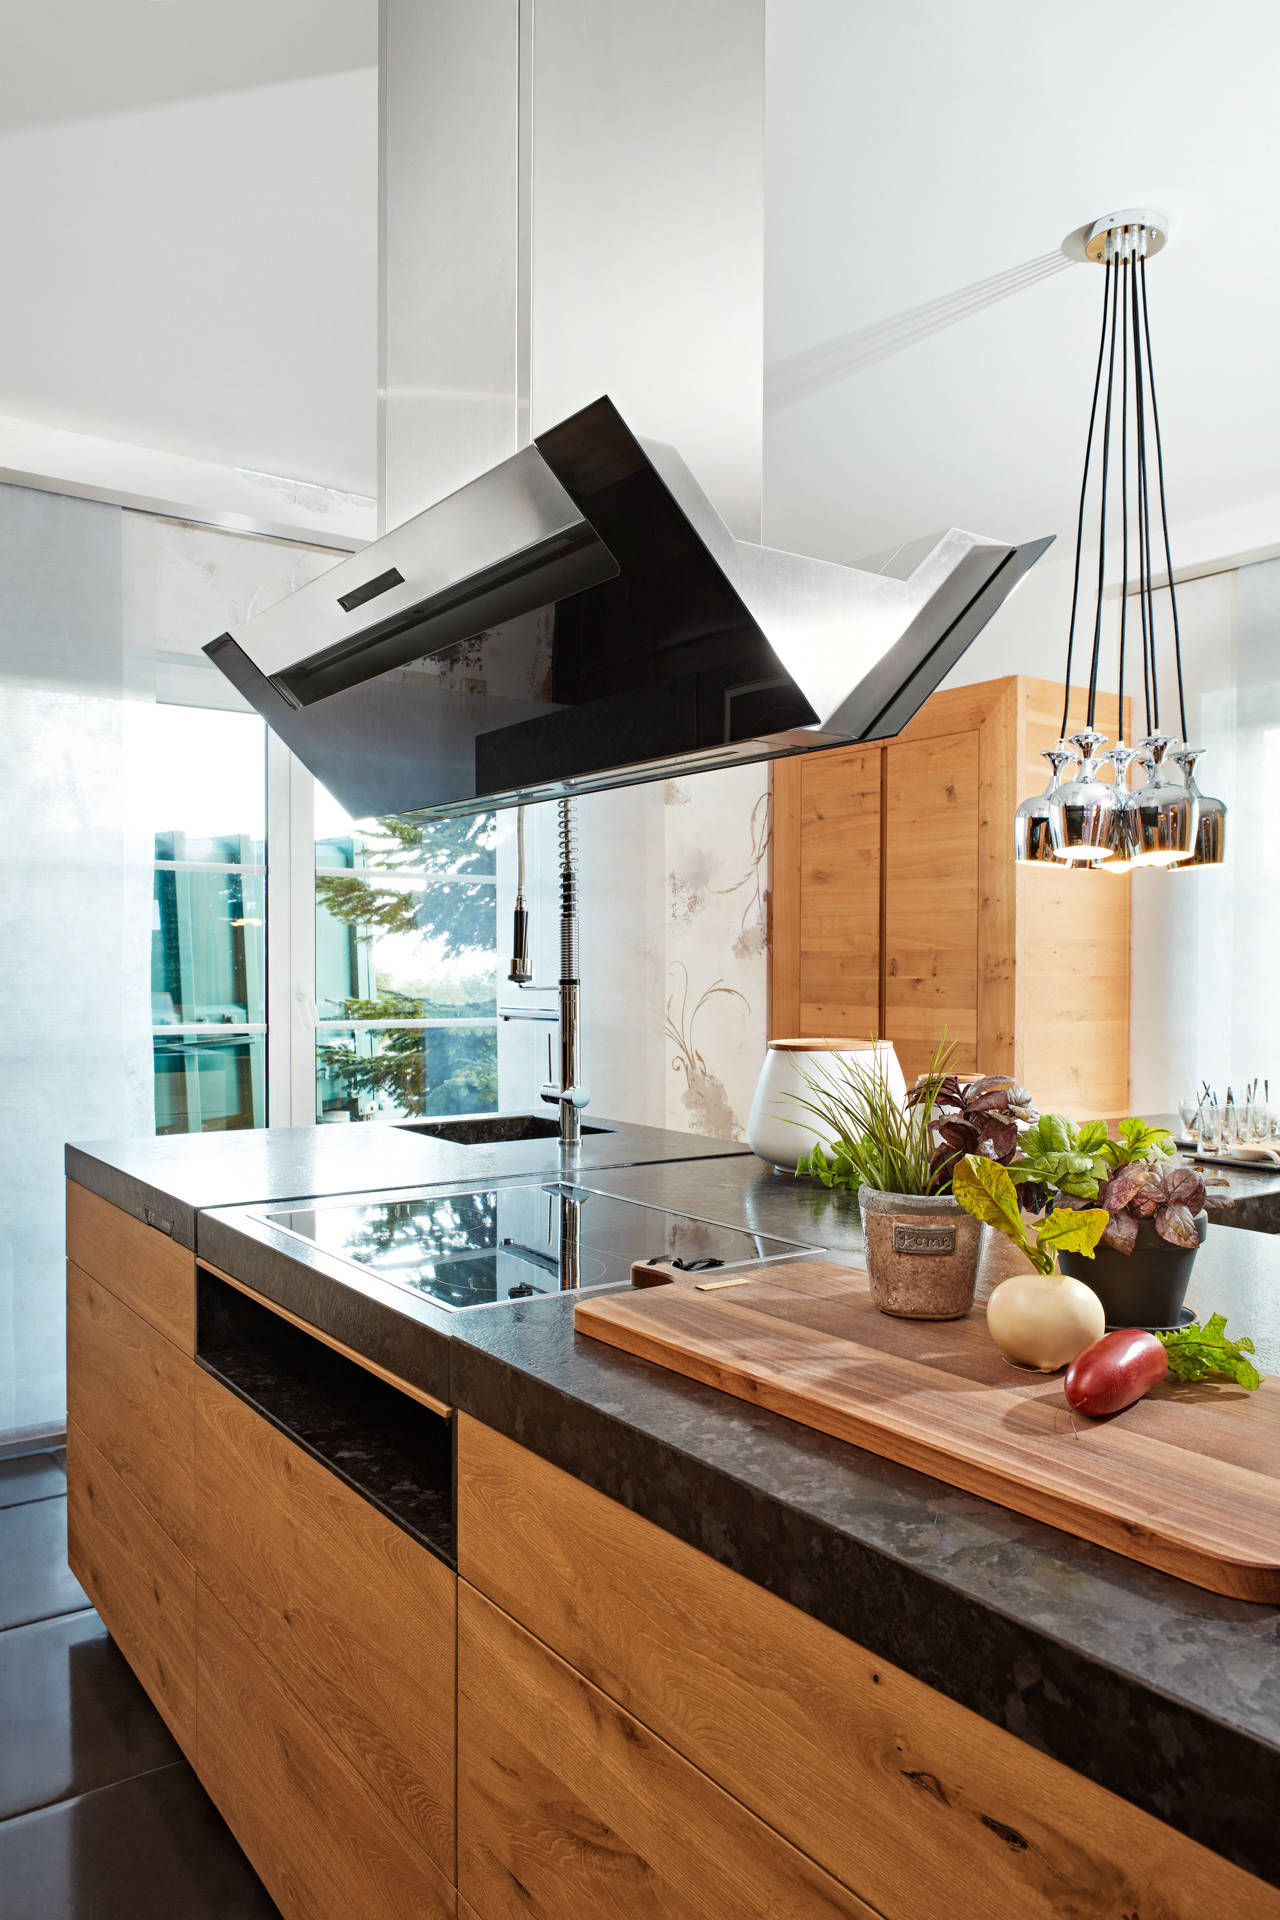 75 Beautiful Kitchen With Granite Countertops And Black Countertops Pictures Ideas August 2021 Houzz